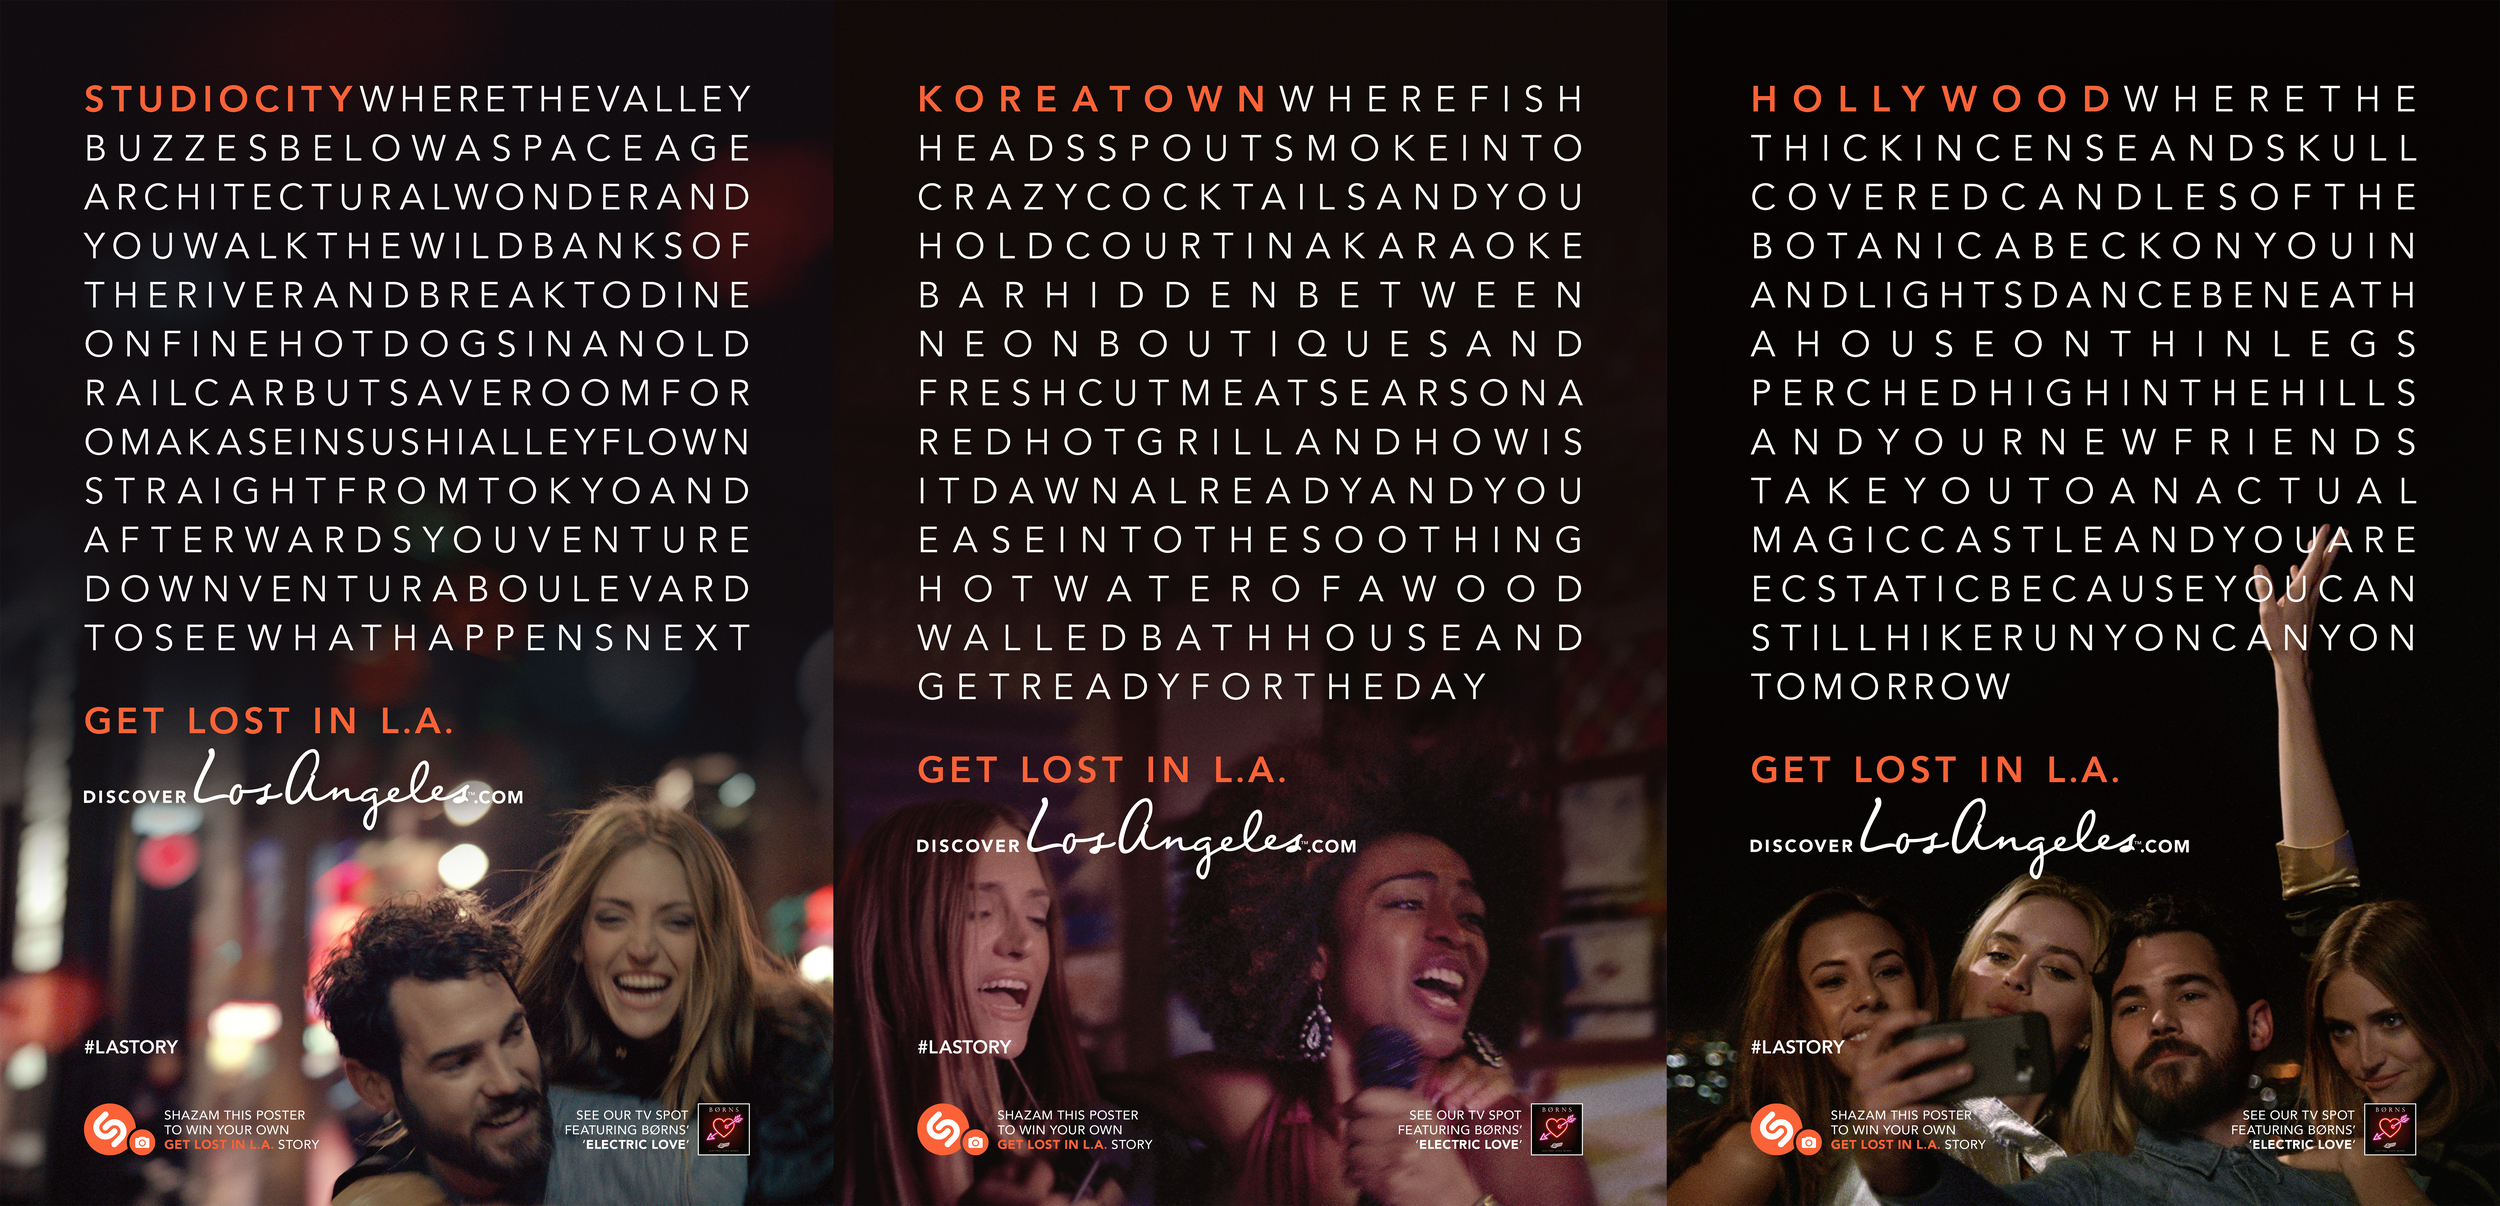  Get Lost in L.A. ad campaign O.O.H. bus shelter ads for L.A. Tourism &amp; Convention Board by Tom Morhous and Remo+Oob, Ltd. 